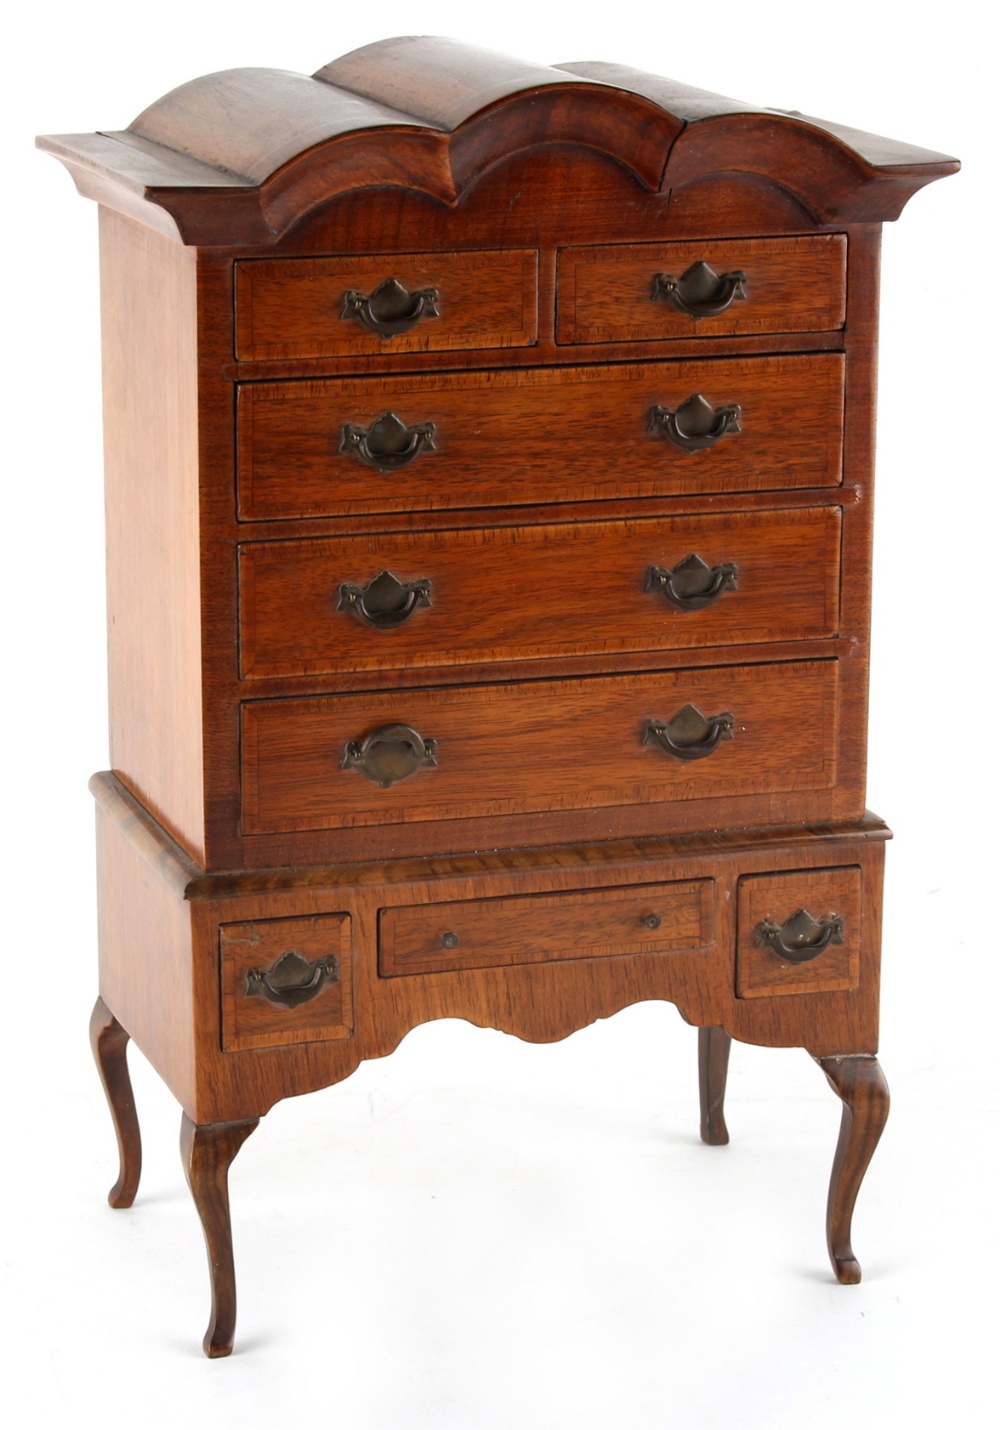 Property of a lady - a miniature or apprentice tallboy or chest-on-stand, in early 18th century